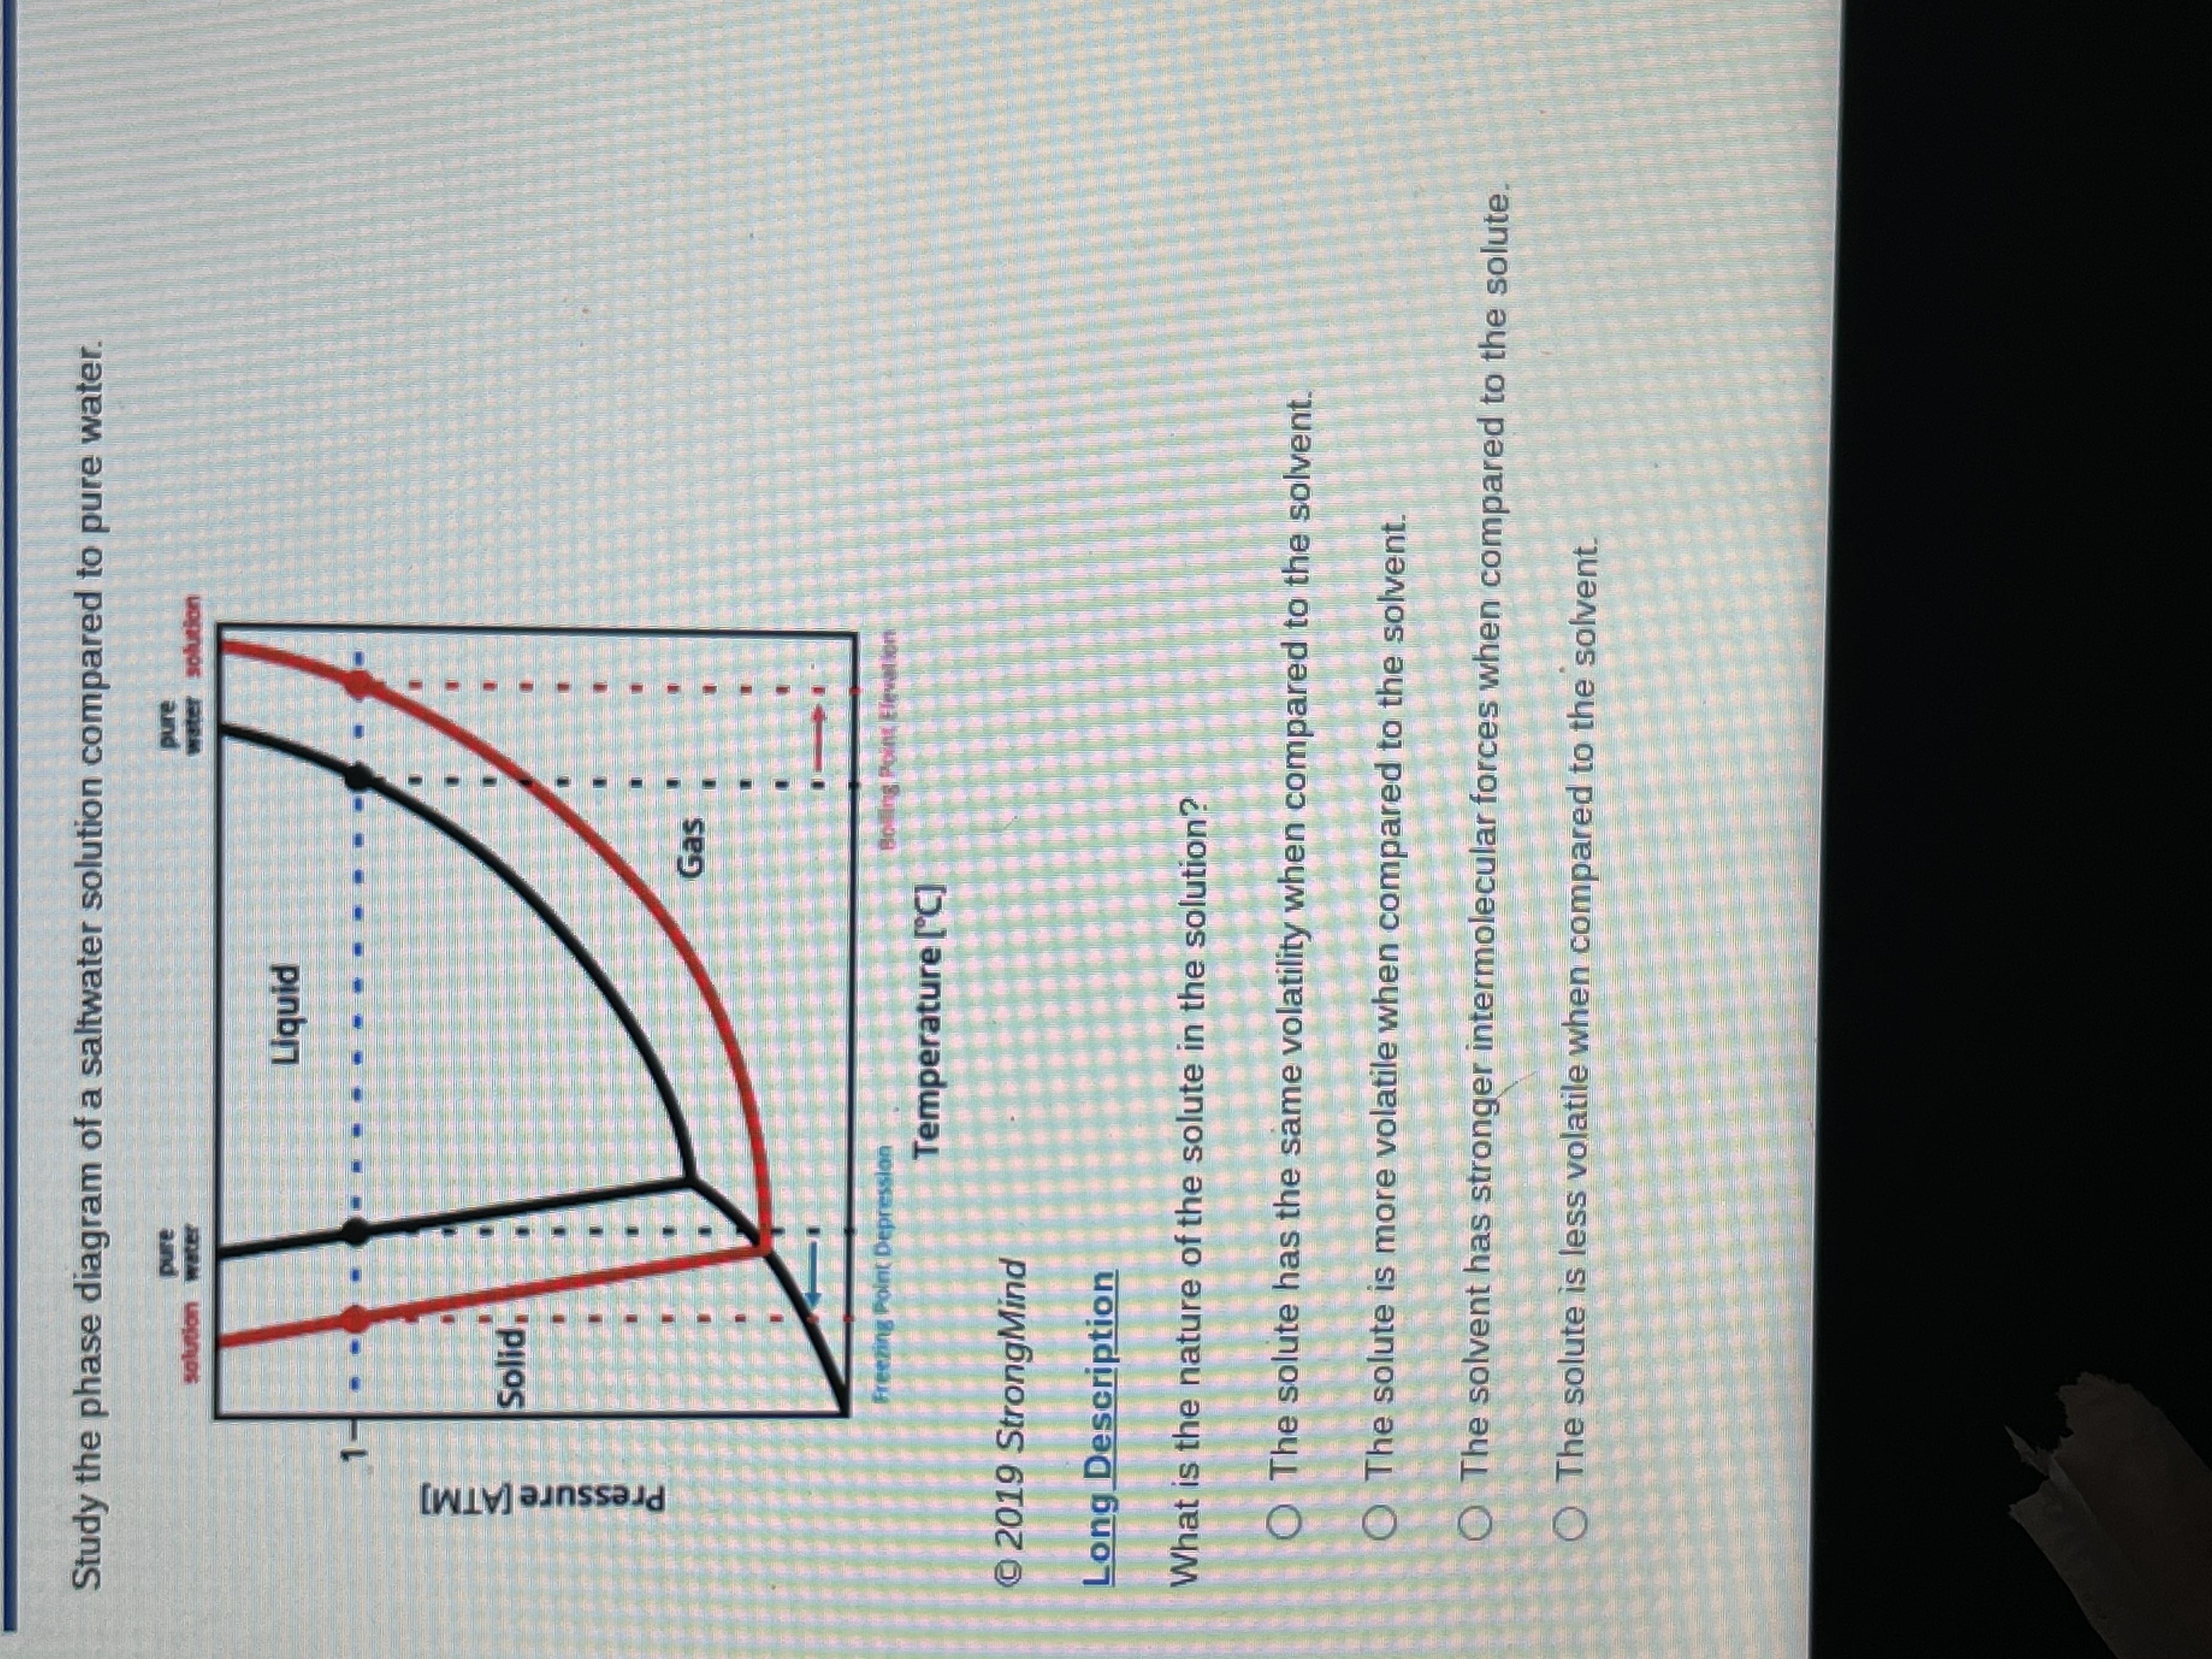 Study The Phase Diagram Of A Saltwater Solution Compared To Pure Water.